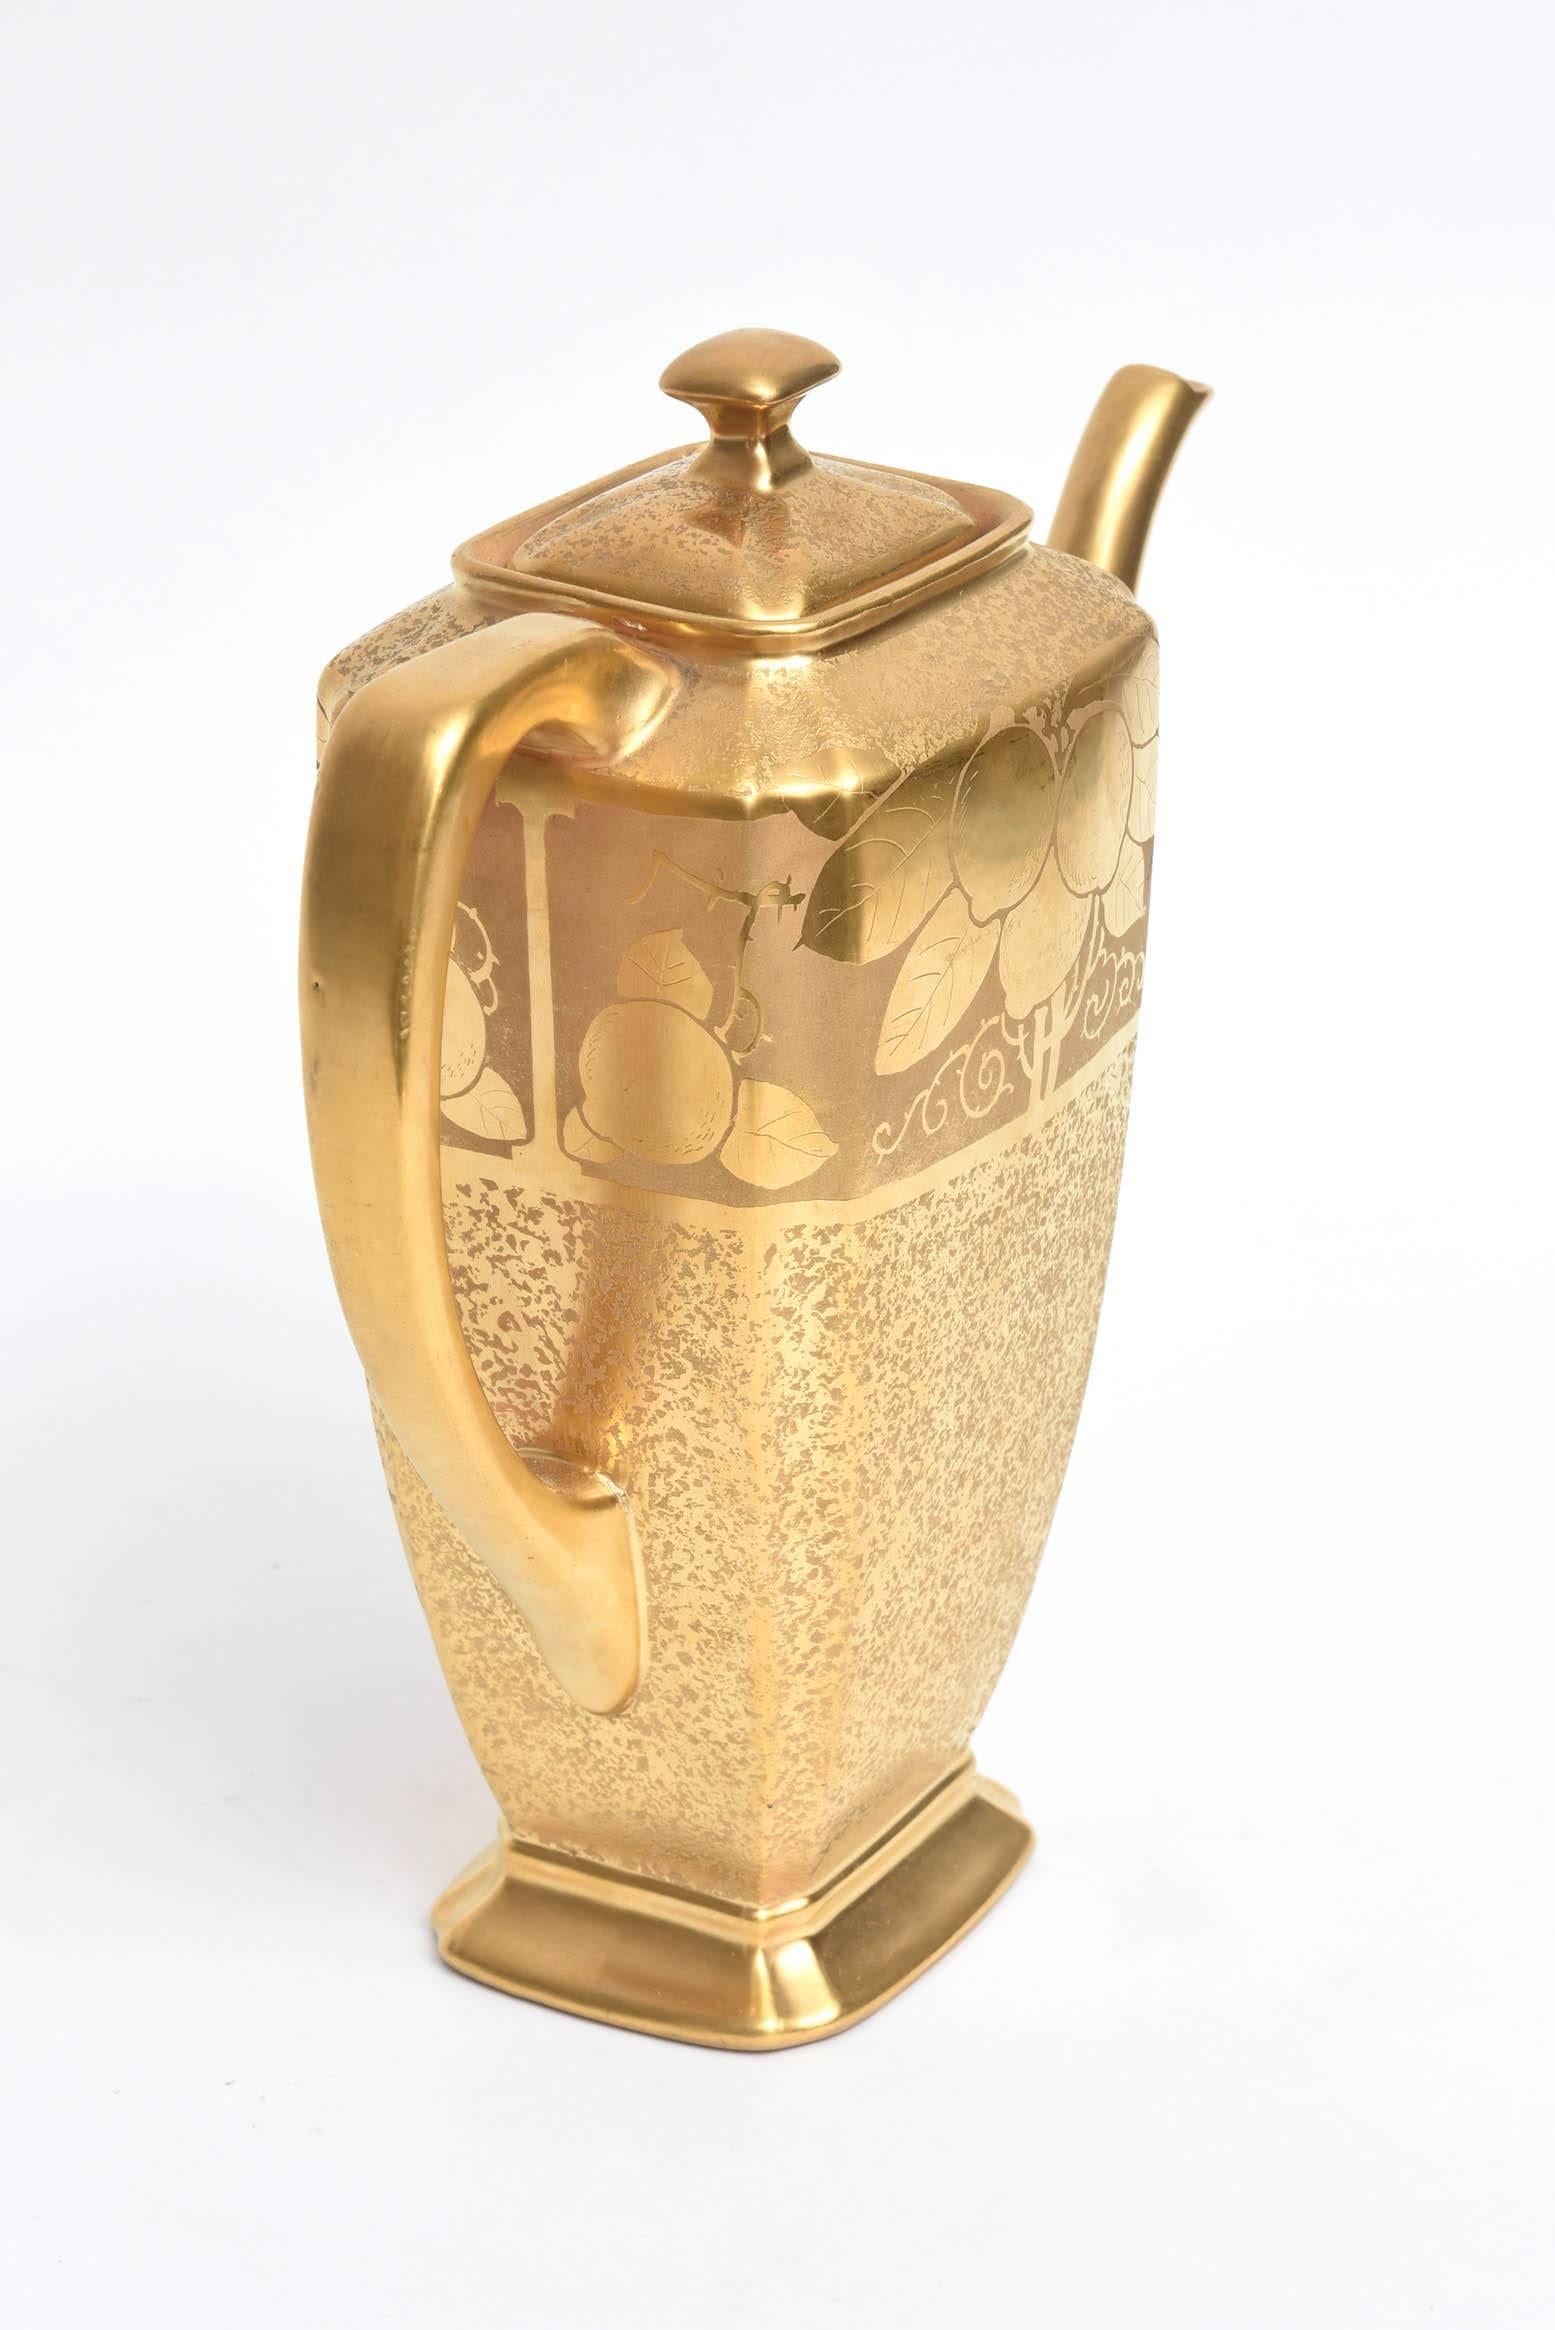 Hand-Crafted Art Nouveau Style Gilt Encrusted Coffee Pot, Peacock and Floral